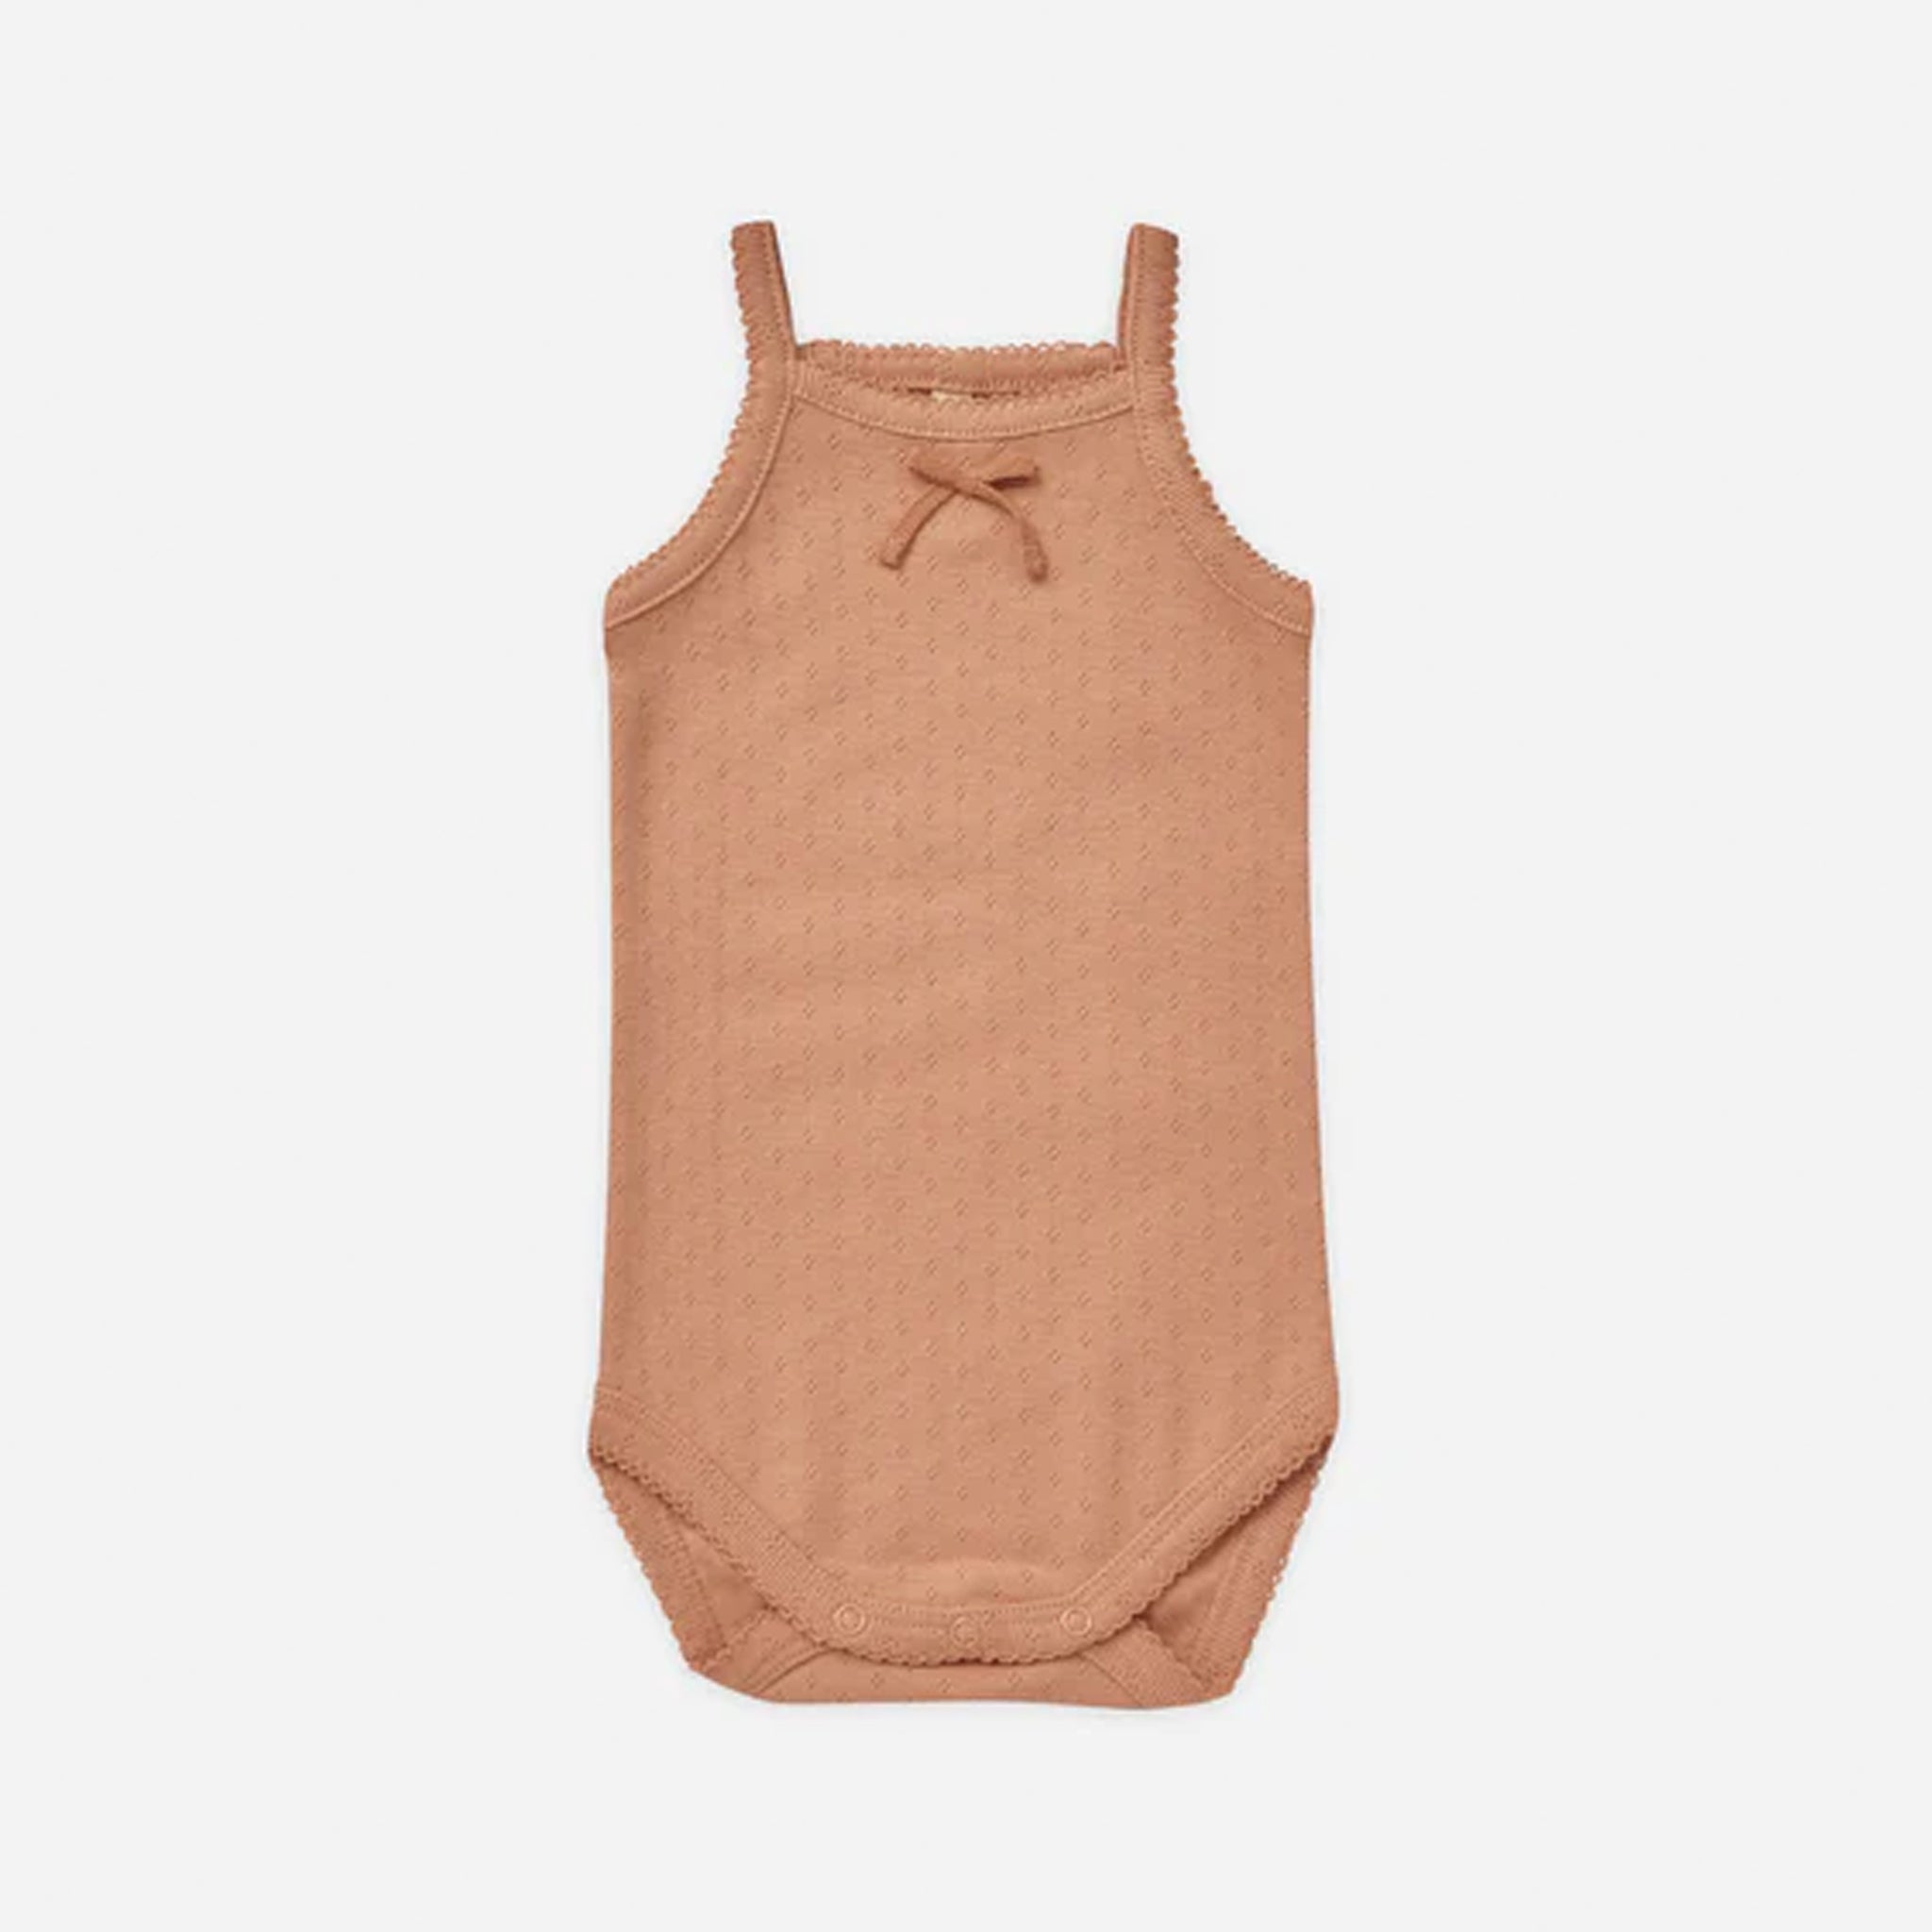 On a white background is a light orange tank onesie with snap closure and a small bow detail at the top.